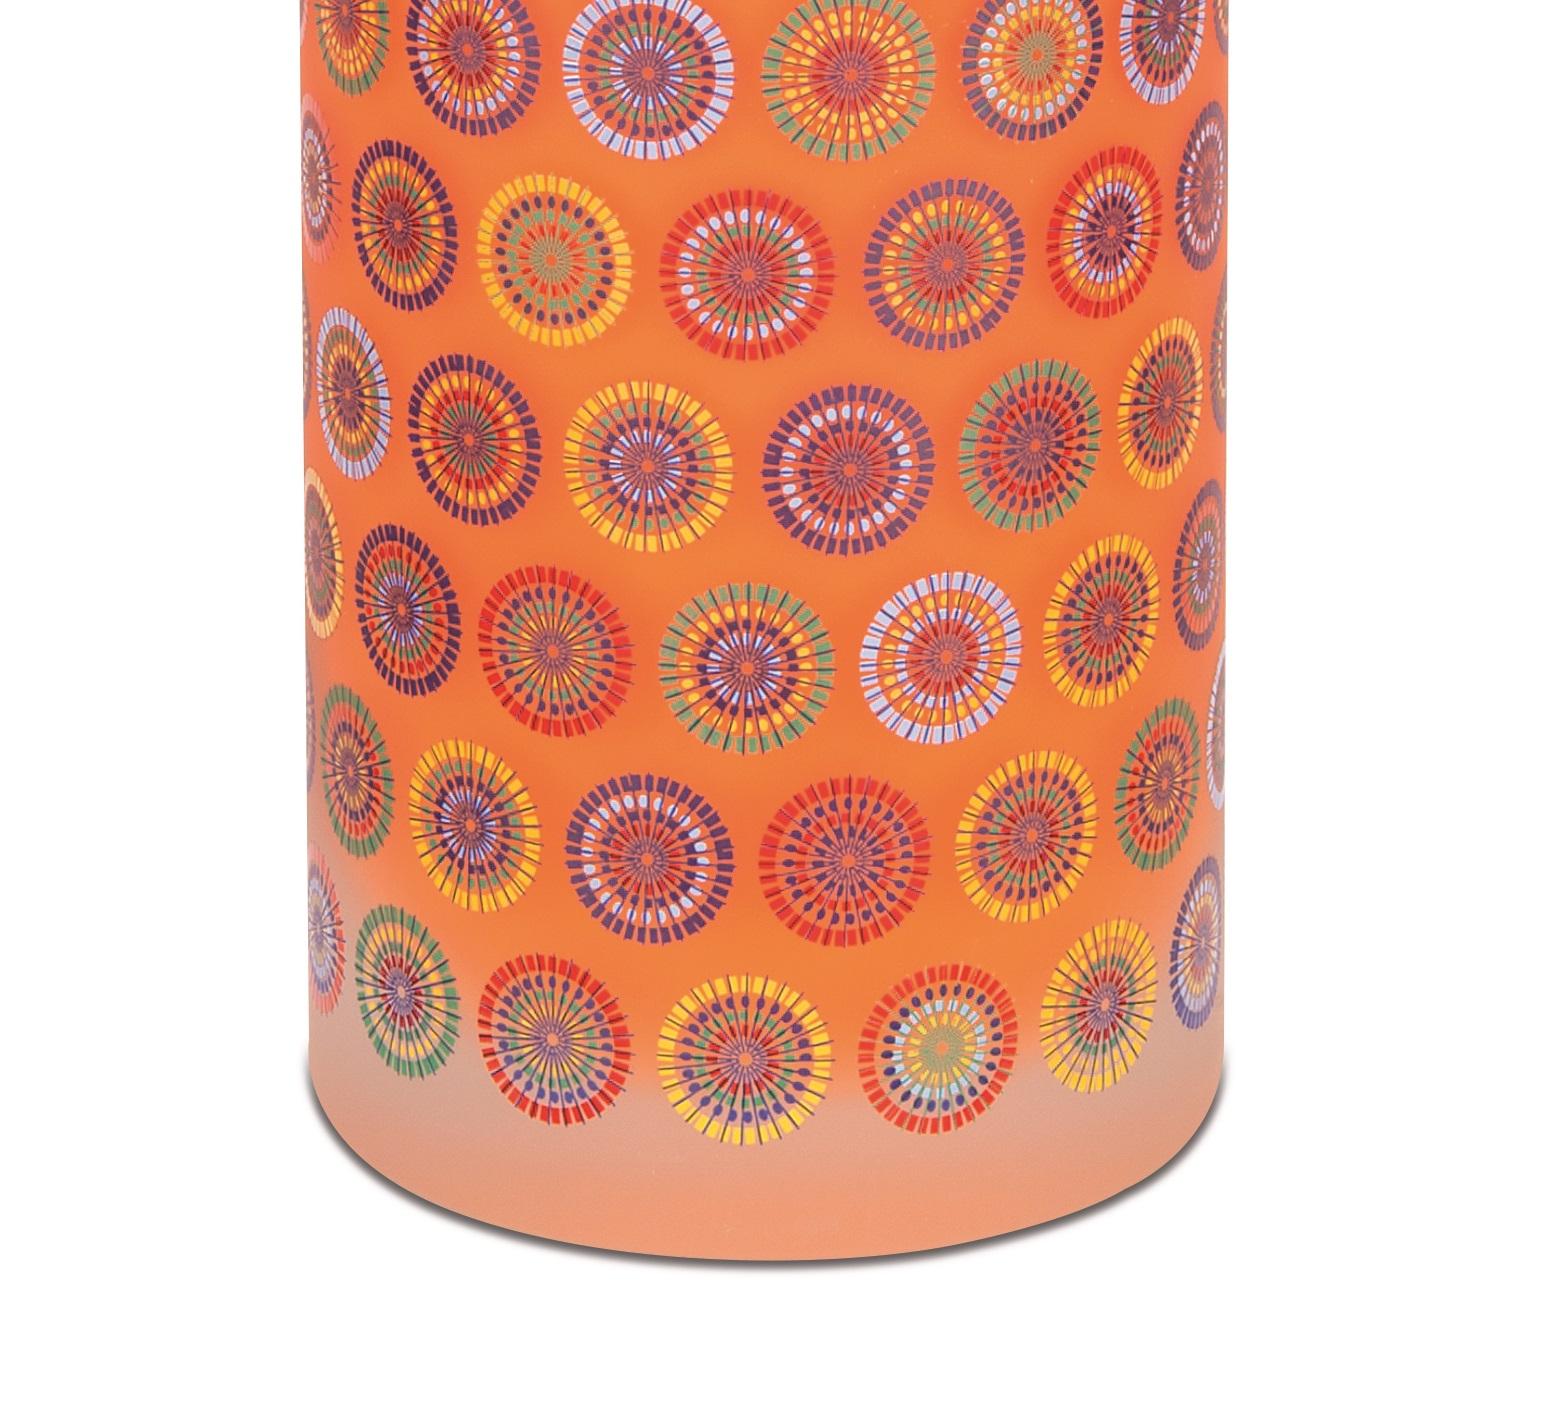 Hand-Crafted Cylindrical Colored Handmade Italian Glass Vase by Sottsass Associati For Sale